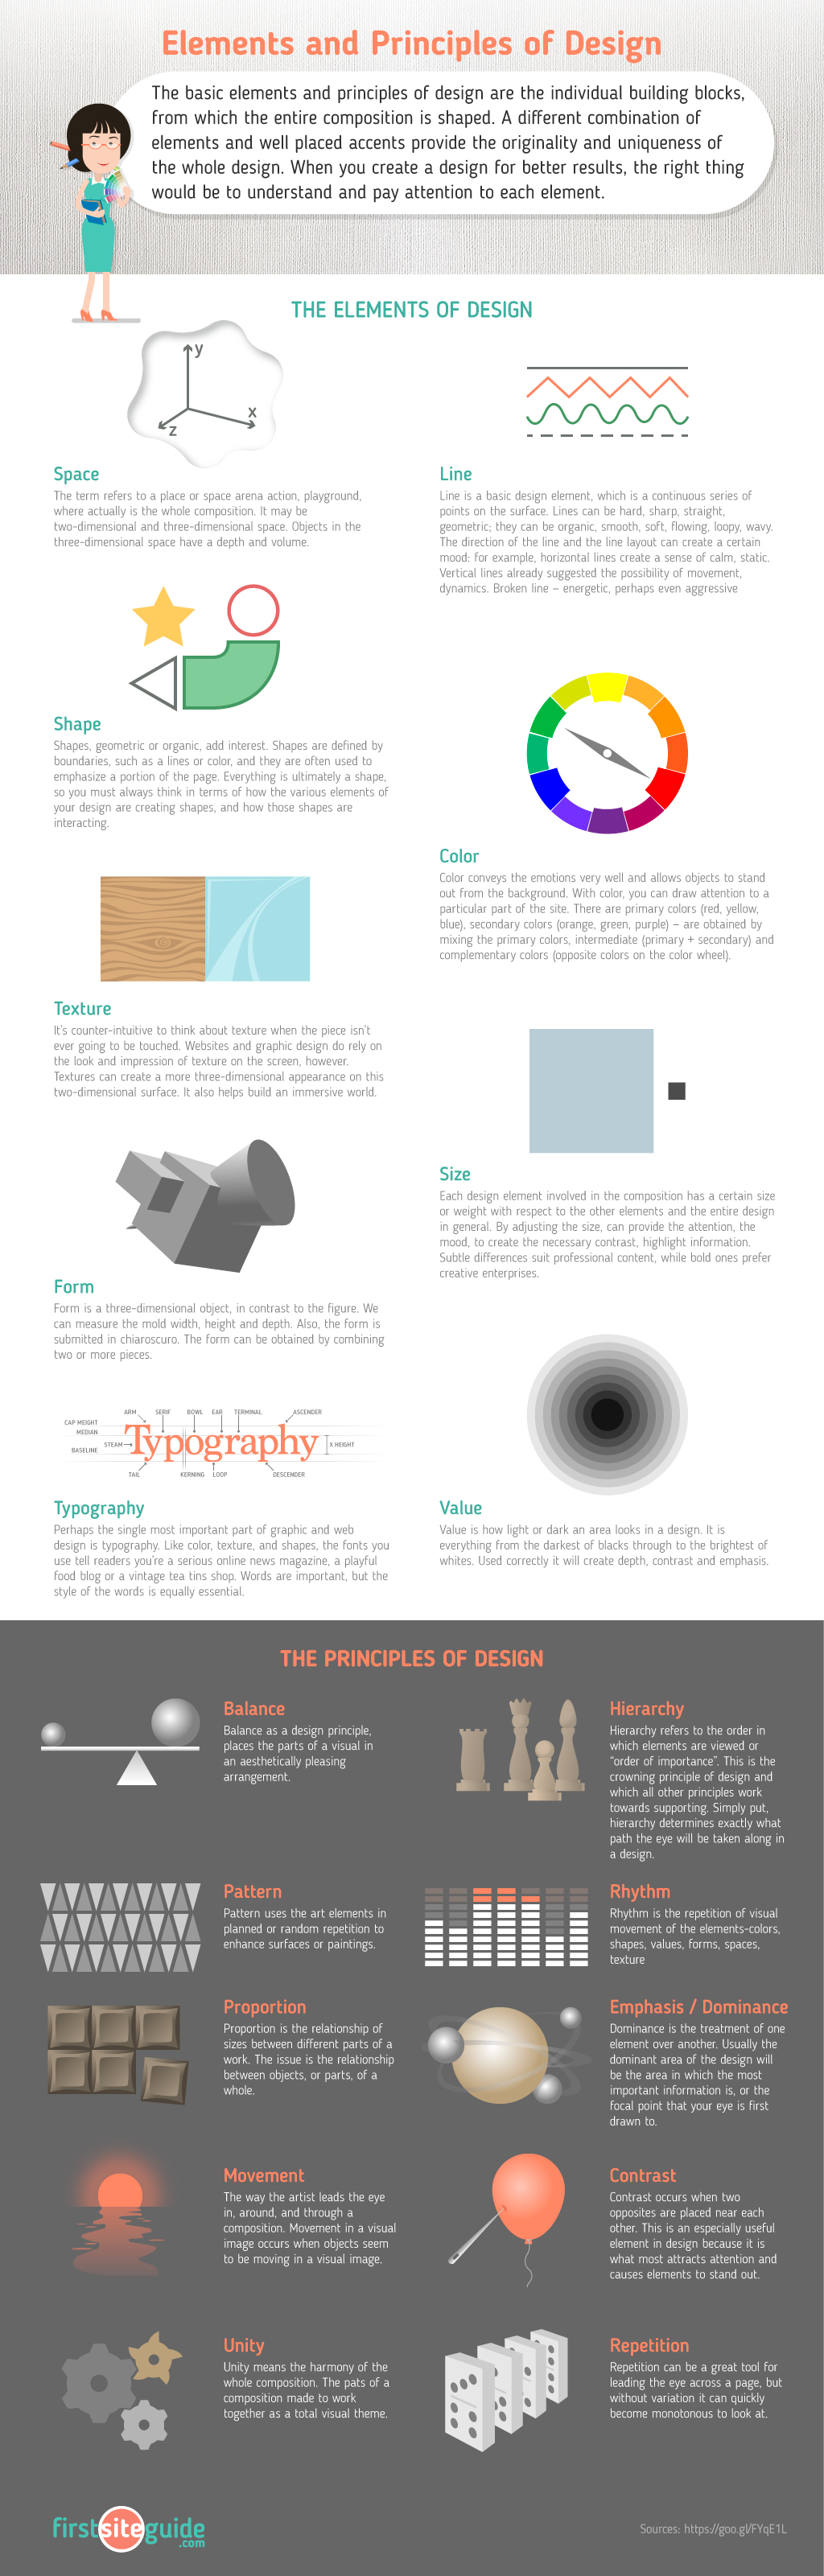 Elements and Principles of Design - Cheat Sheet